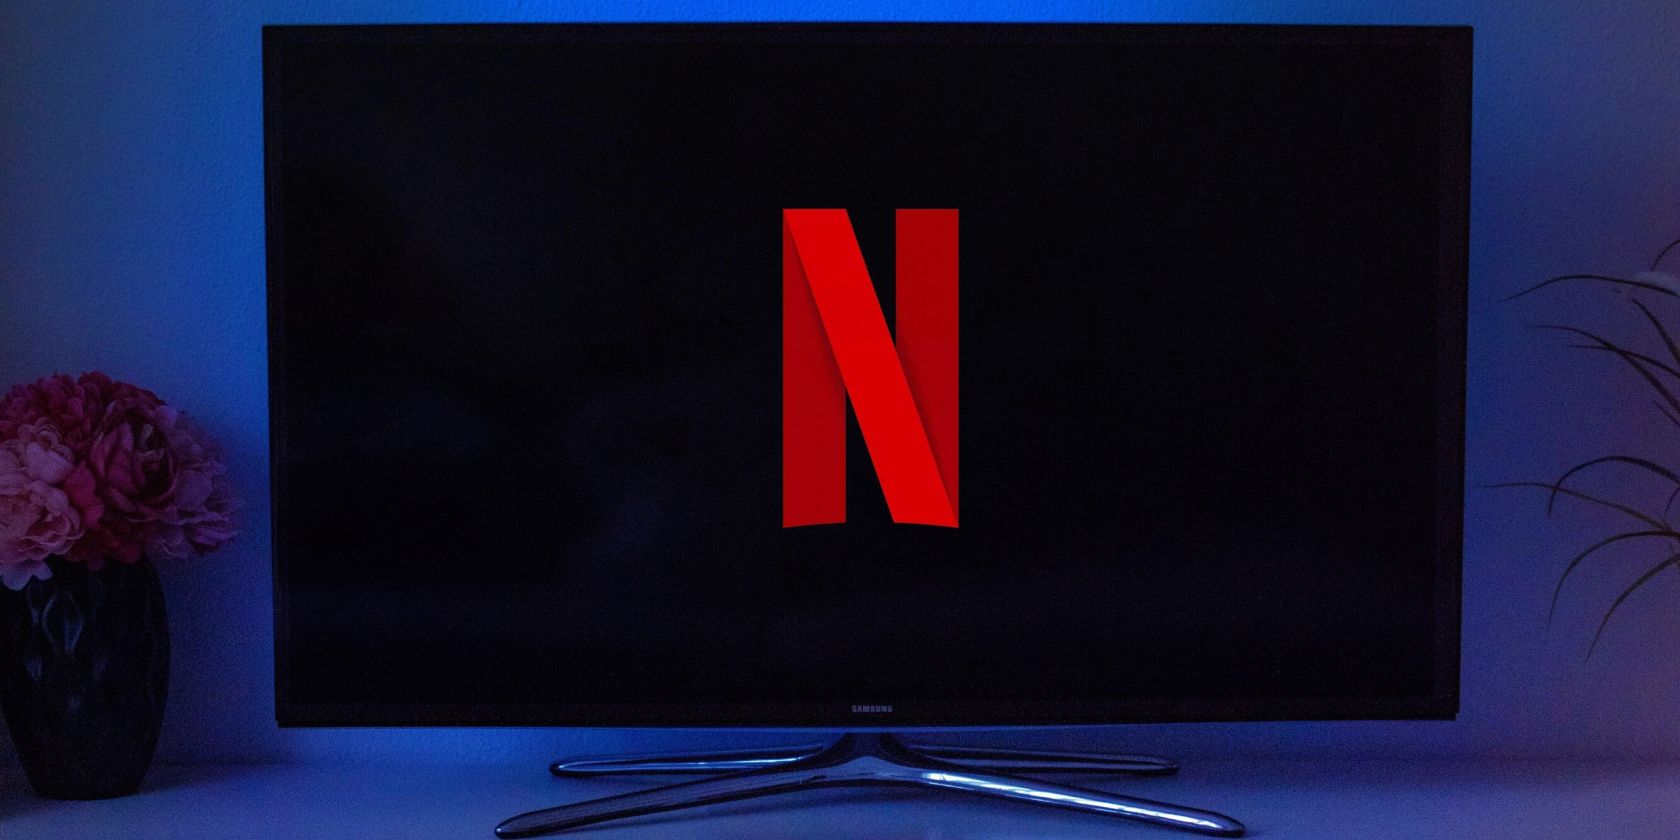 How To Watch Netflix On Hotel TV From IPhone